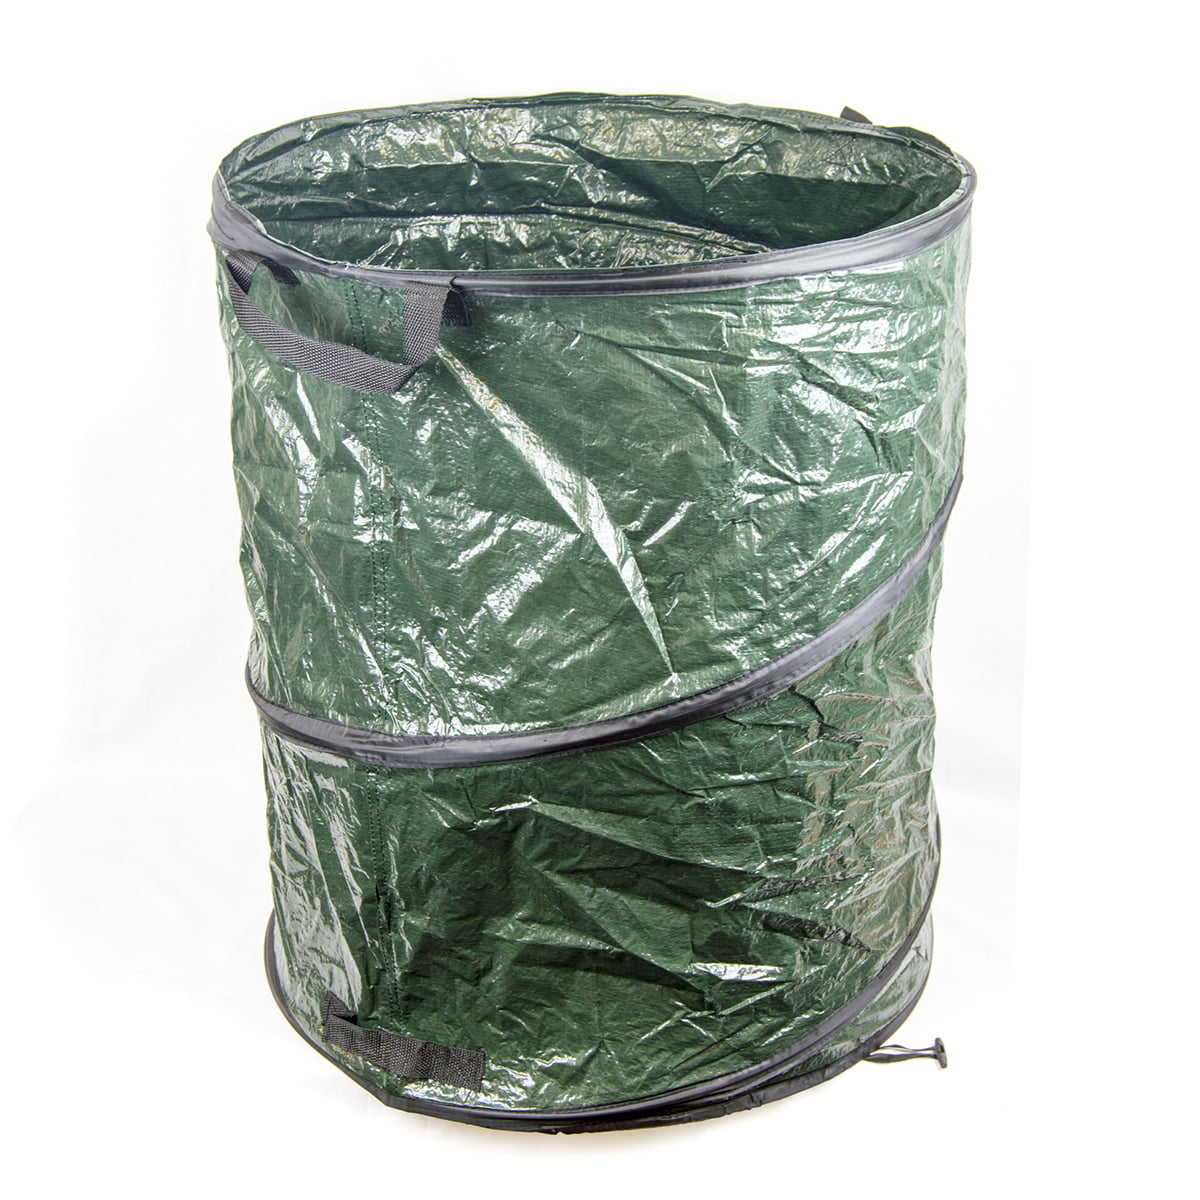 Details about   BPA Free Disposable Pail Liner for 5 Gallon Bucket for Marinading and Brining 